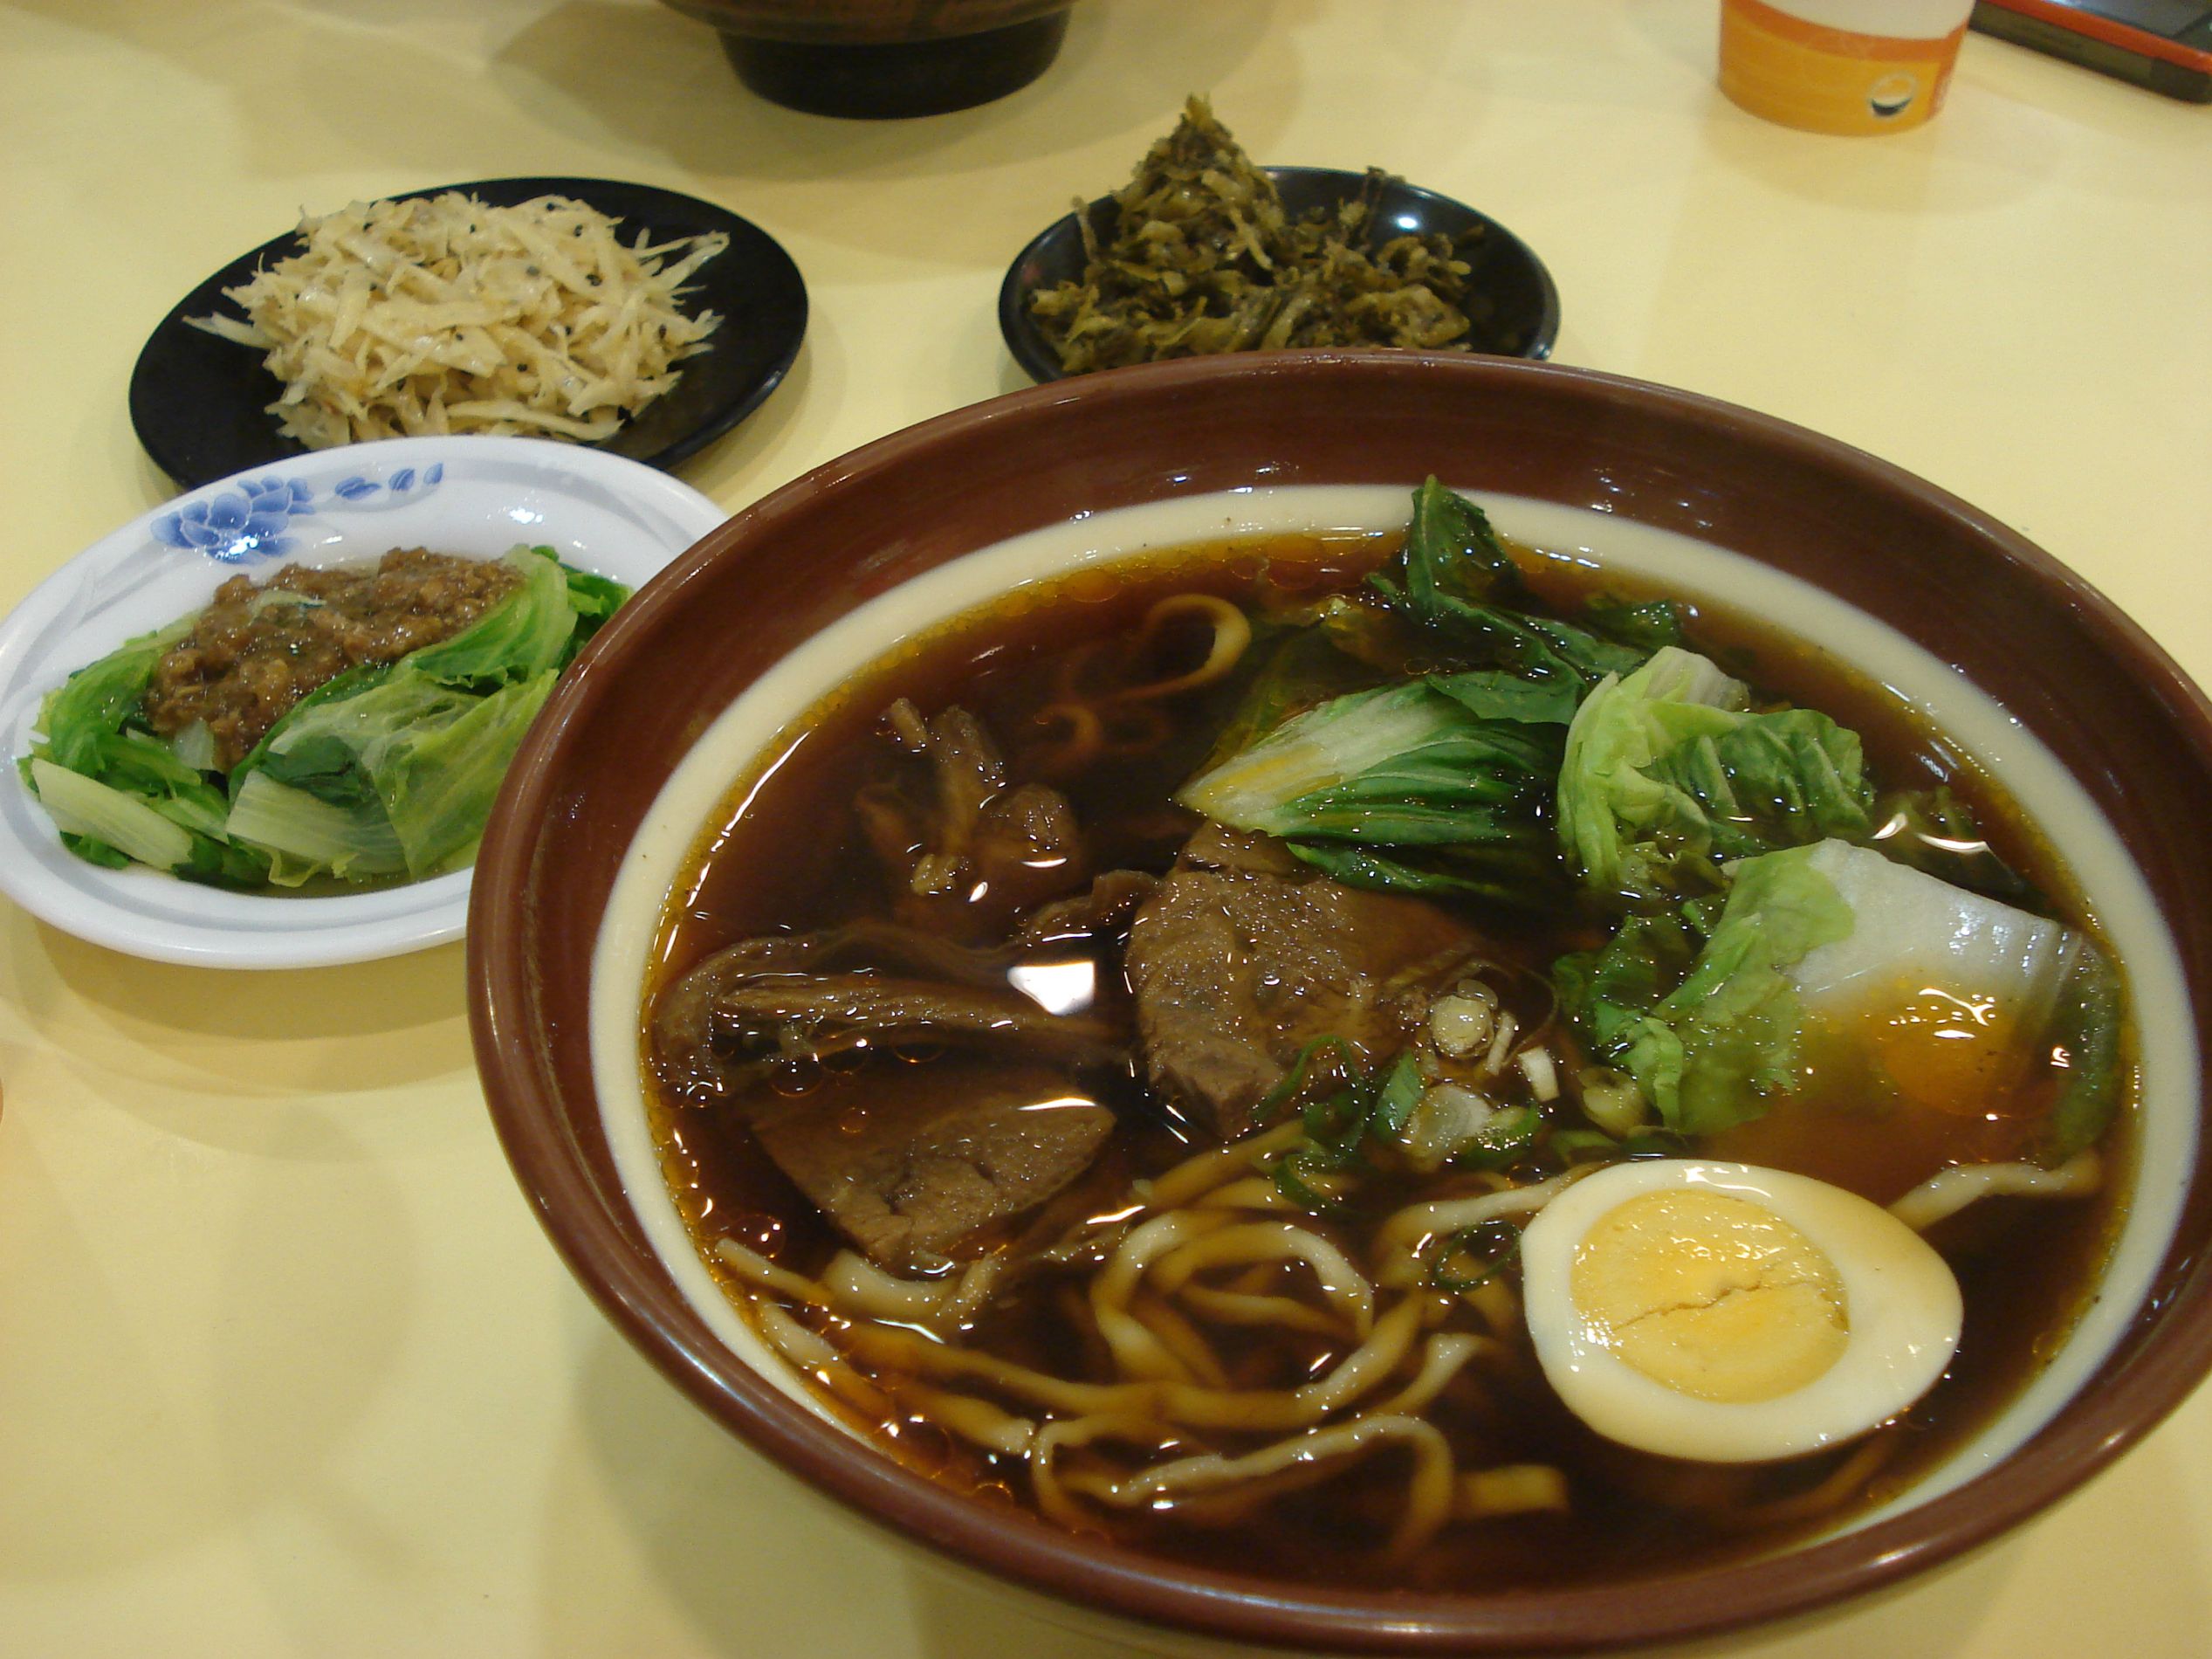 My Taiwanese Food Court Meal: 牛肉麵 (Beef Noodles) - Oh Snap! Let's ...